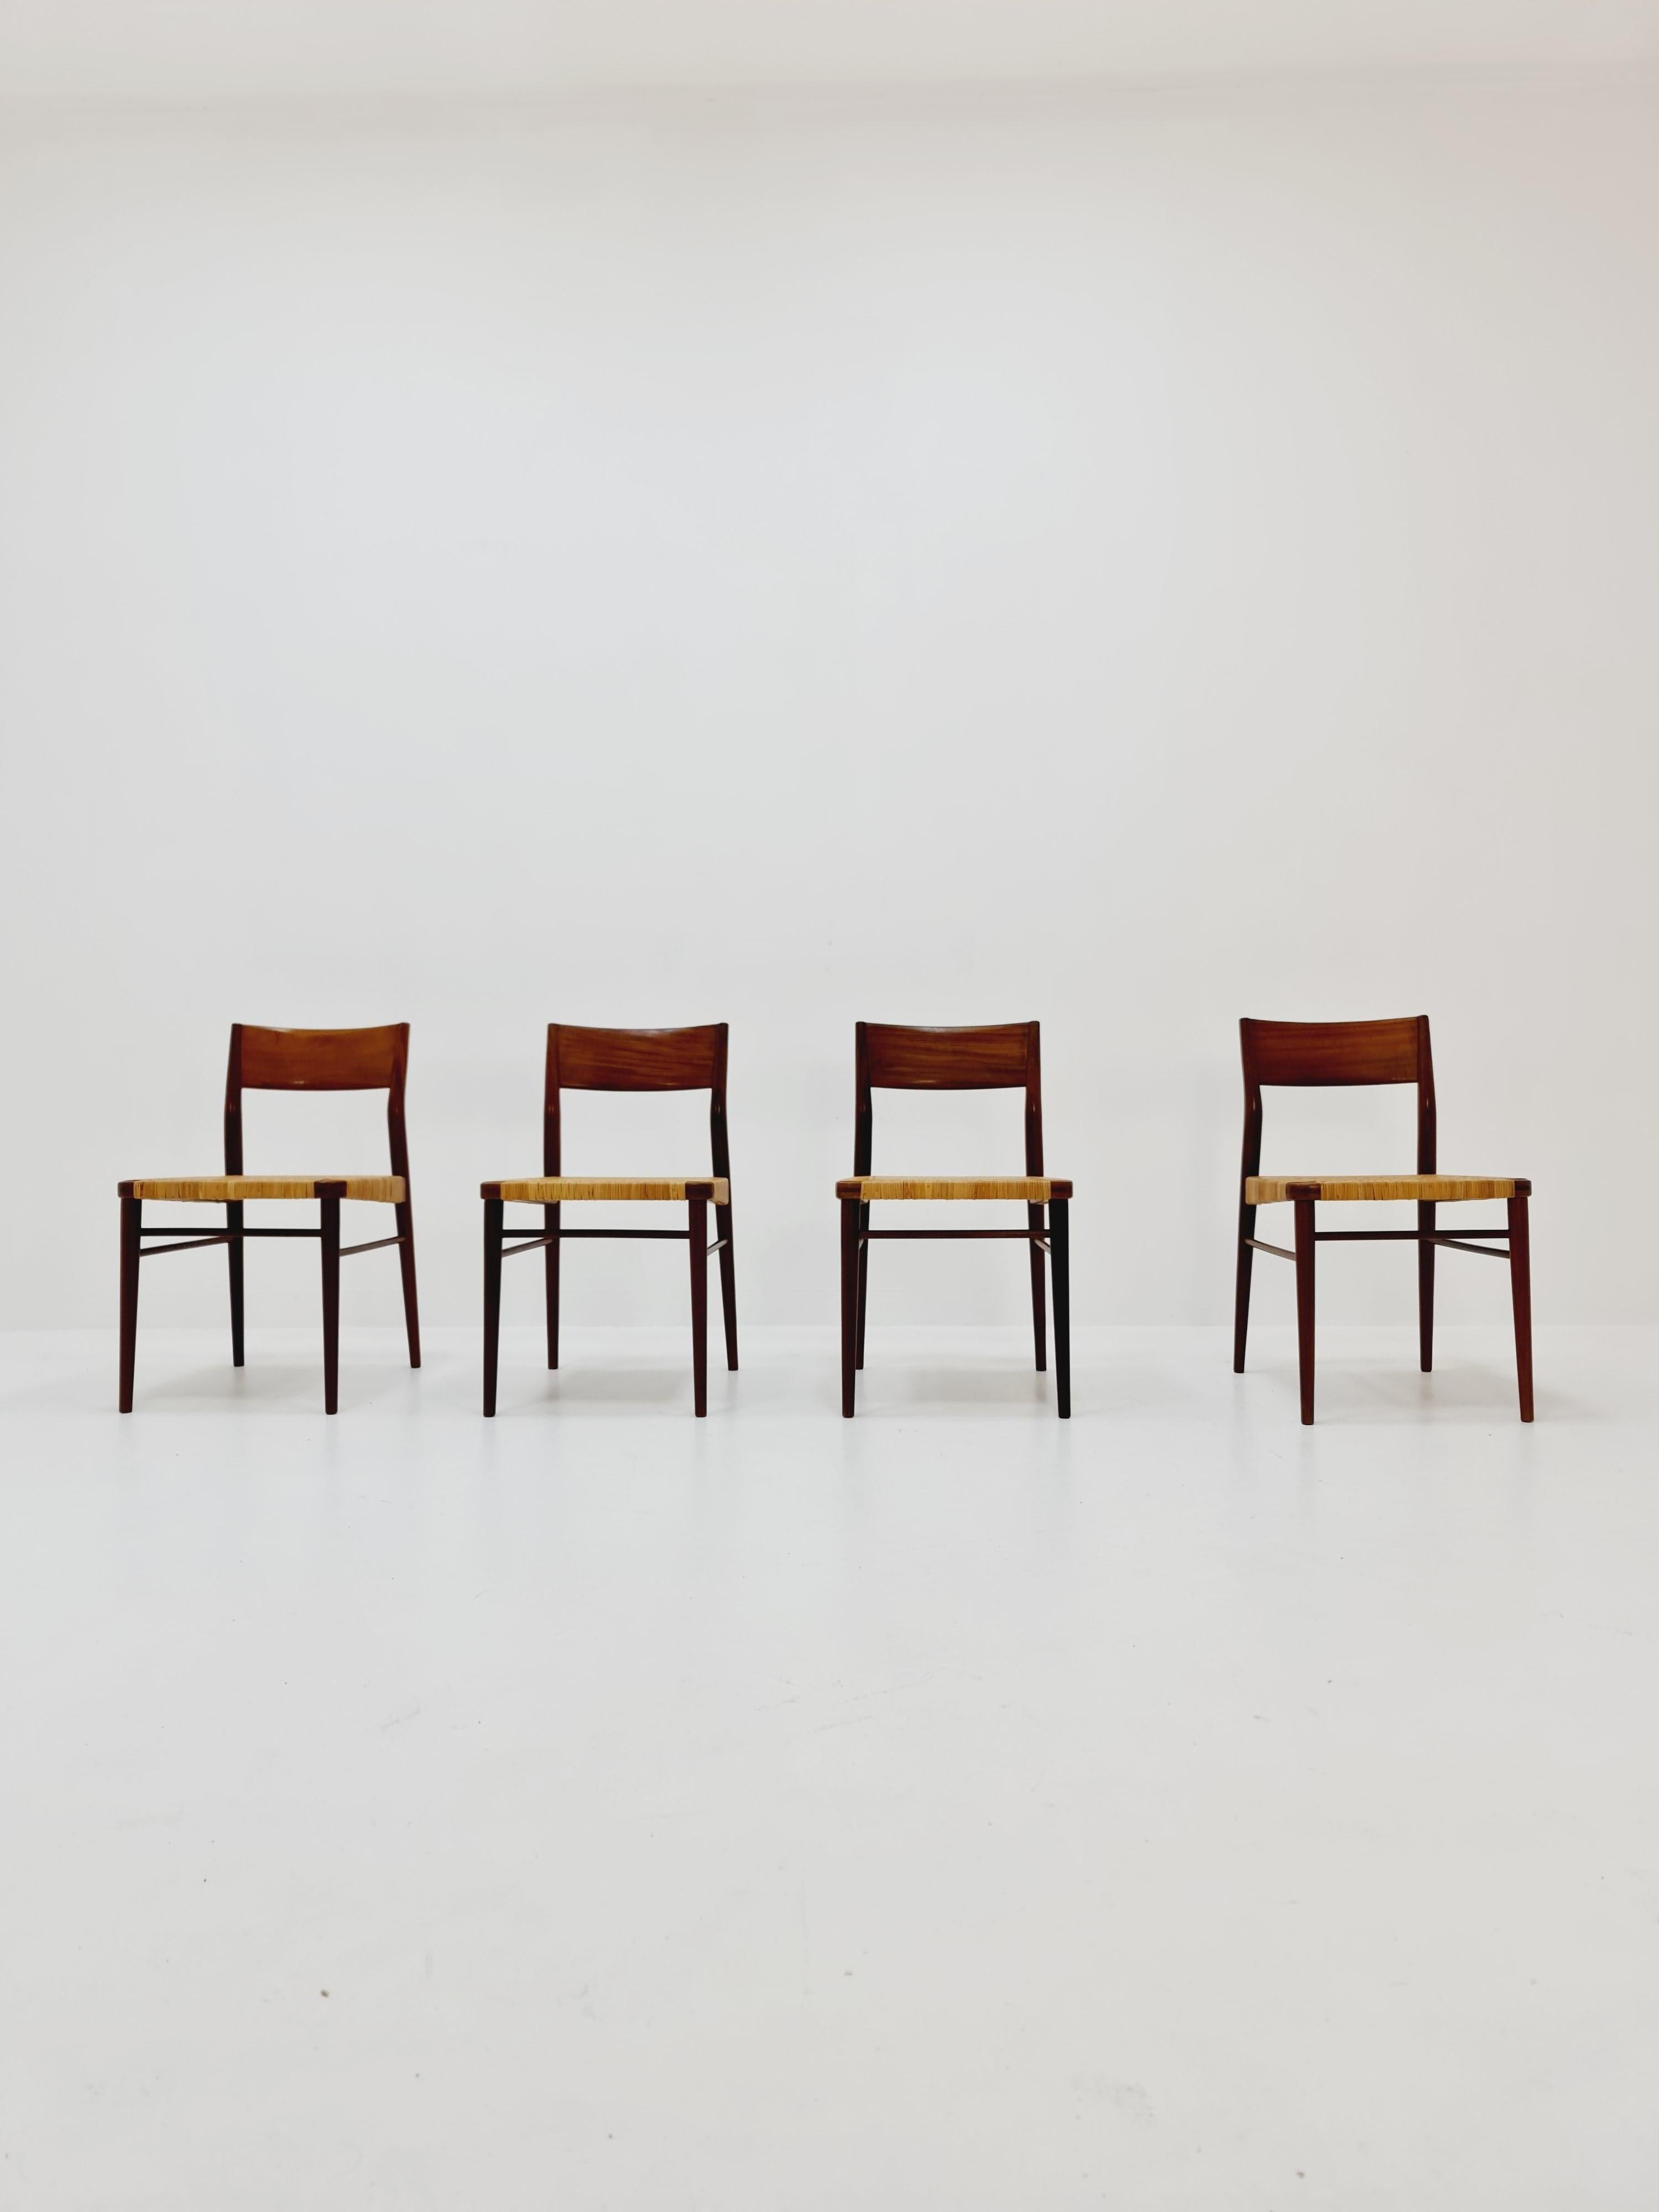 Mid Century German teak and rattan chairs by Georg Leowald for Wilkhahn, 1960s, Set of 4

The chair frames are made from solid teak and rattan sits, in good vintage condtion, however, as with all vintage items some minor wear marks should be